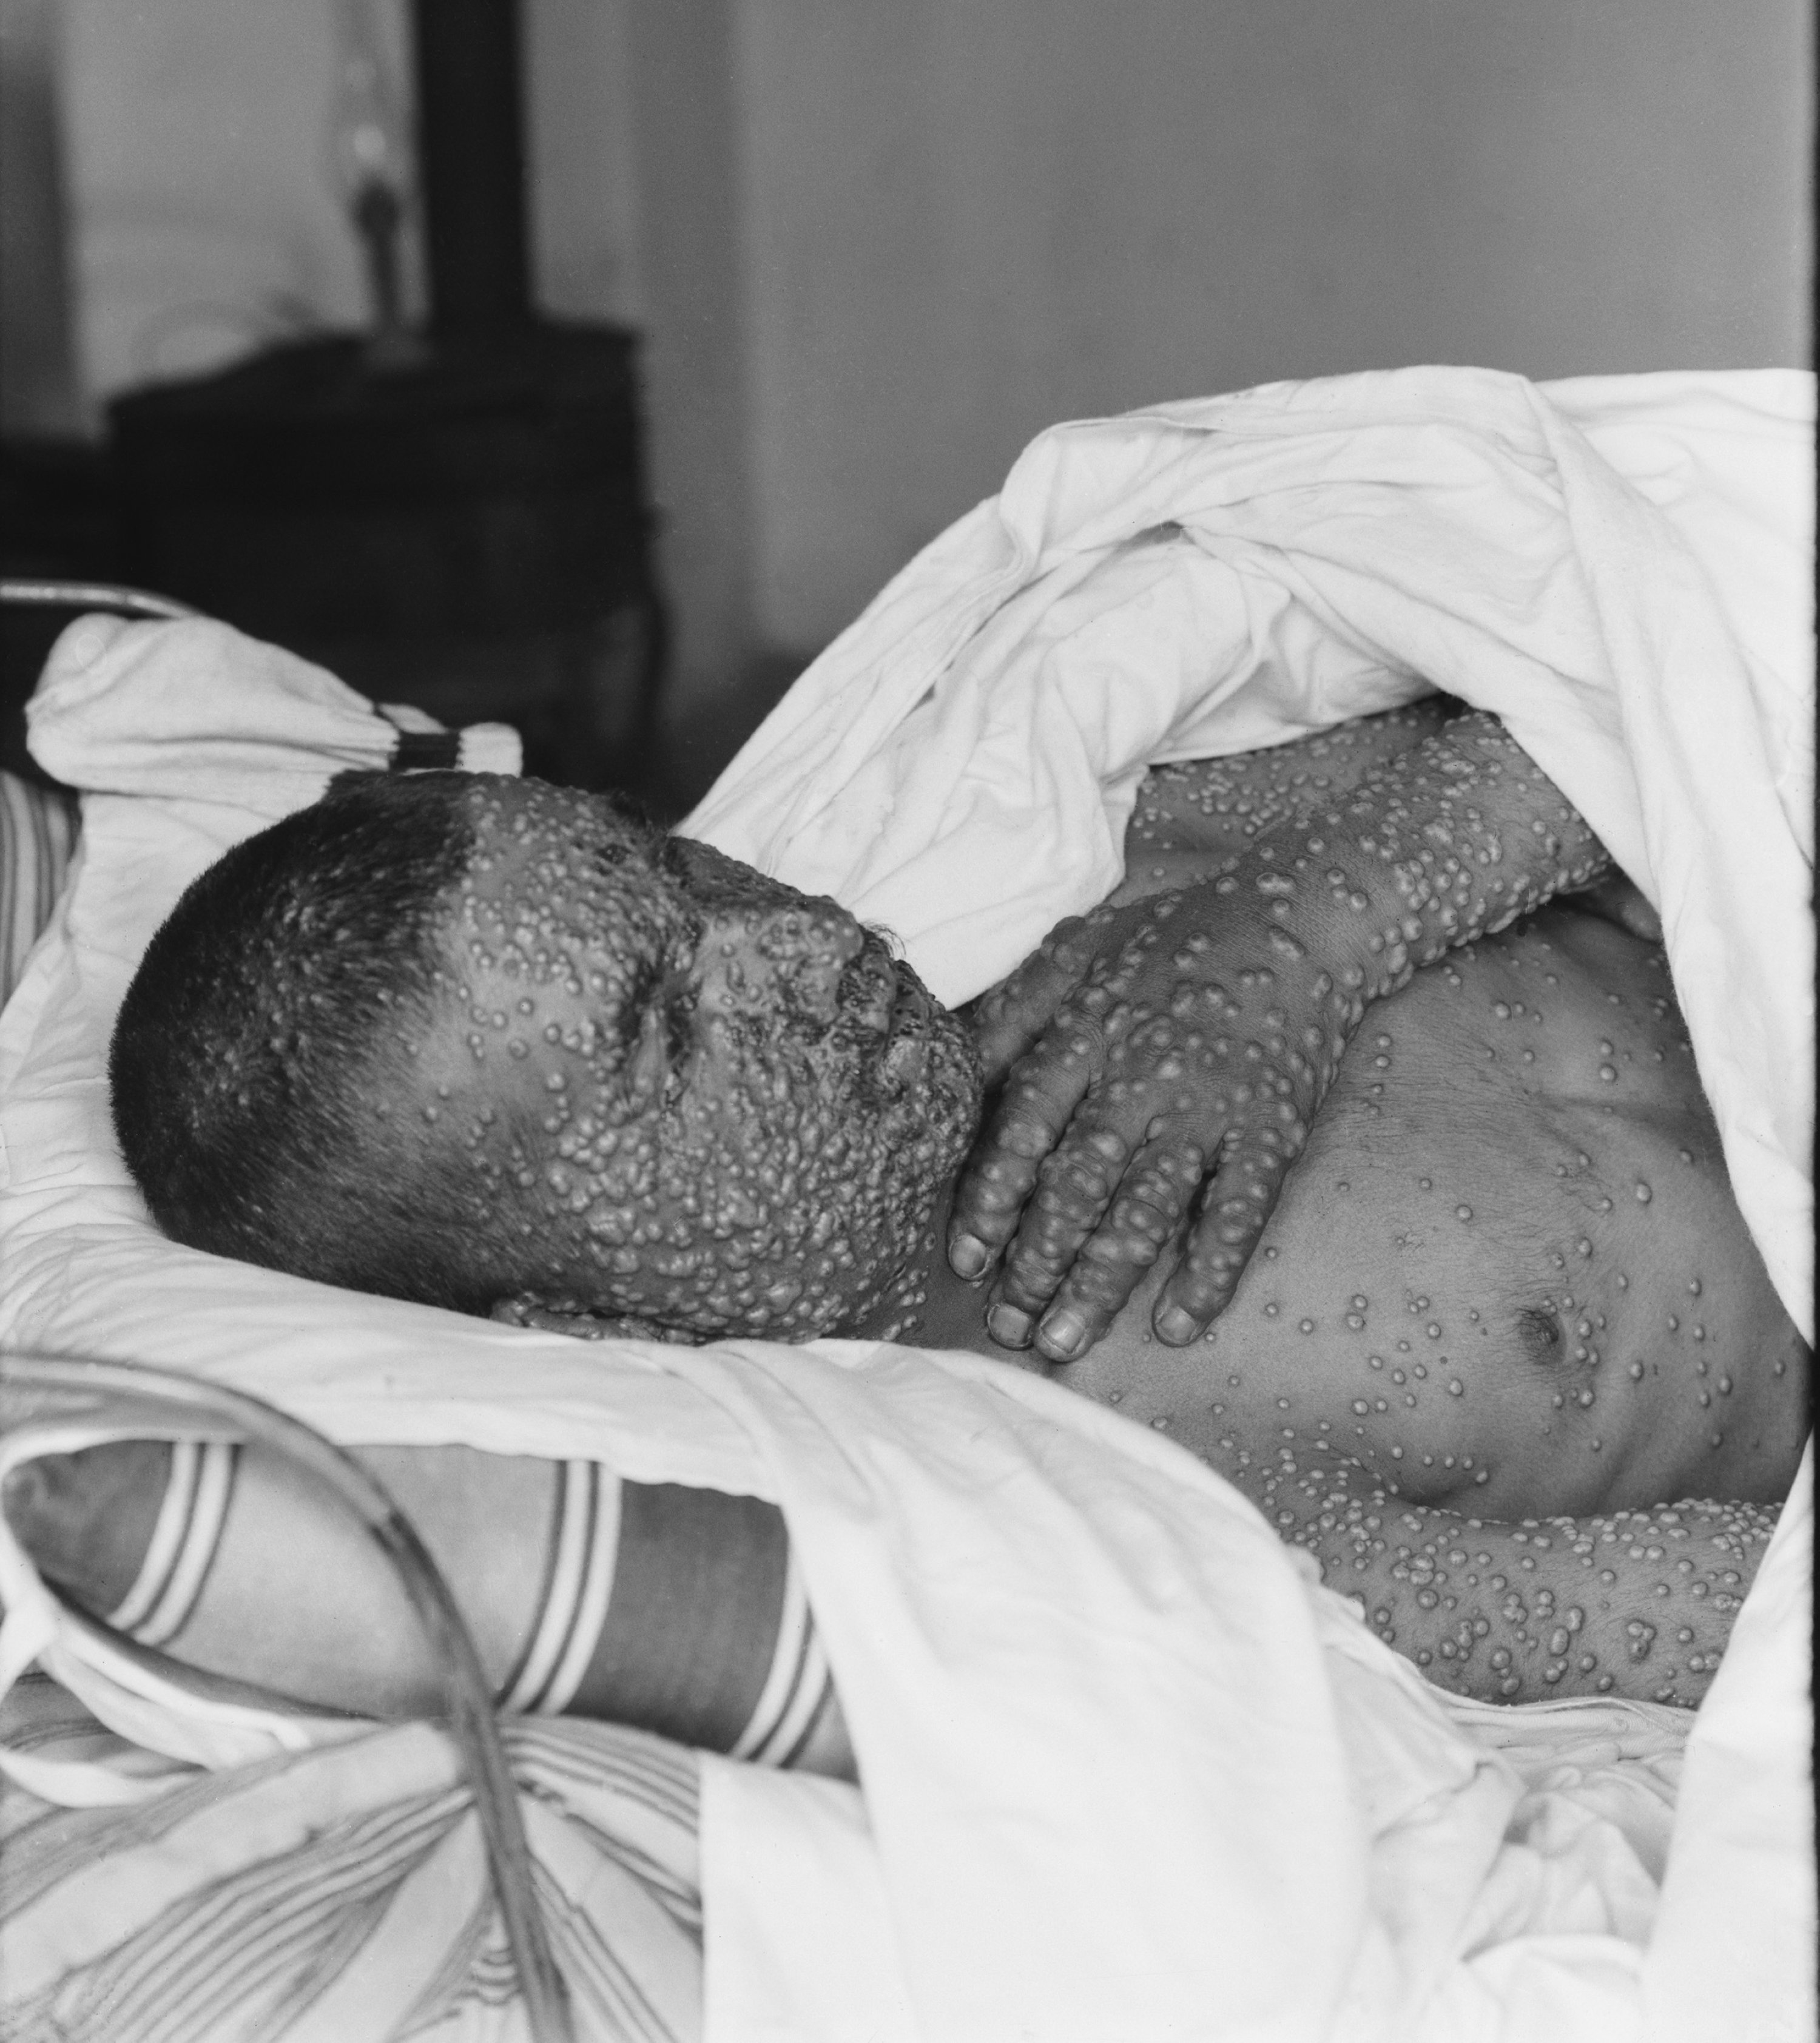 The heavily pockmarked face, arms and hands of a smallpox victim in Palestine, ca. 1900-1925. By 1980 the disease was finally eradicated by the World Health Organization.